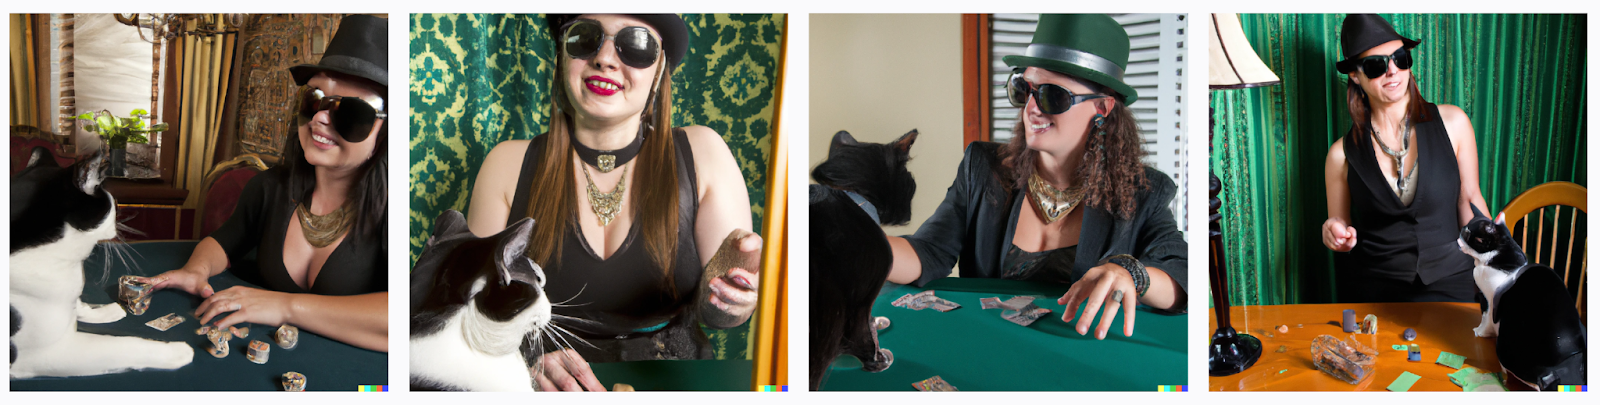 DALL-E 2 results for “A female gangster in a fedora hat talking to a cat wearing sunglasses around a poker table” prompt